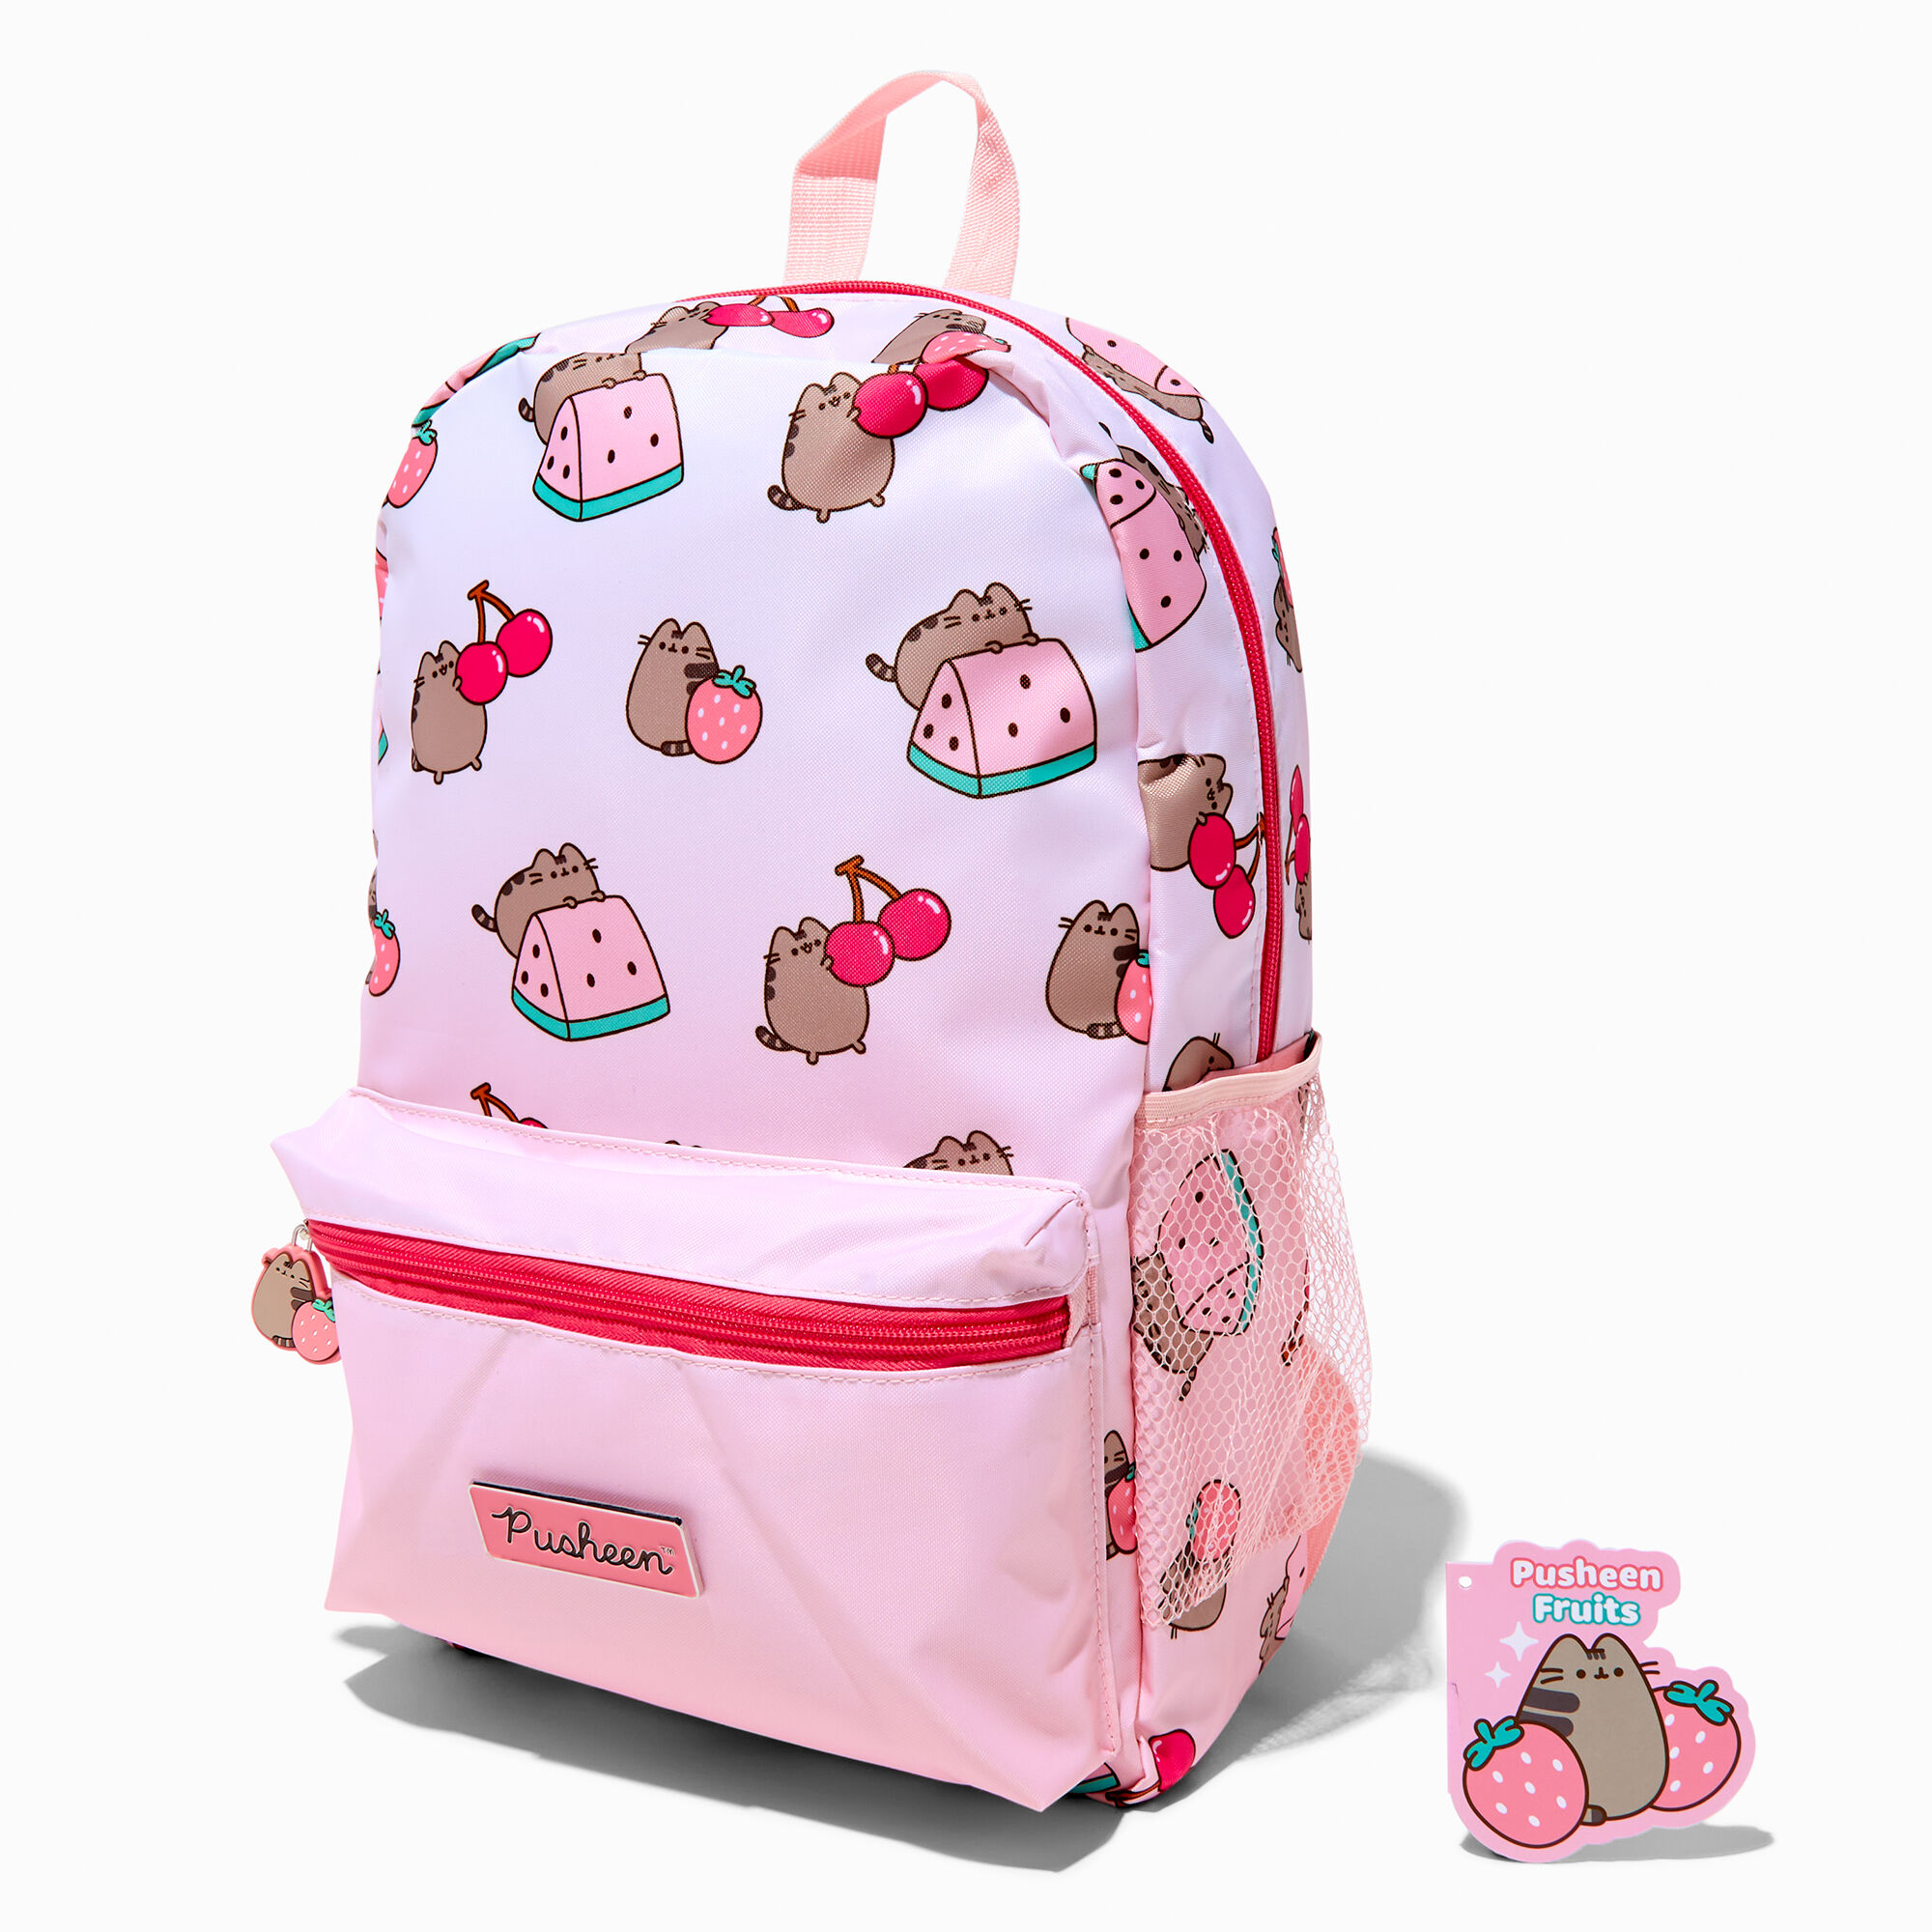 View Claires Pusheen Fruit Backpack information